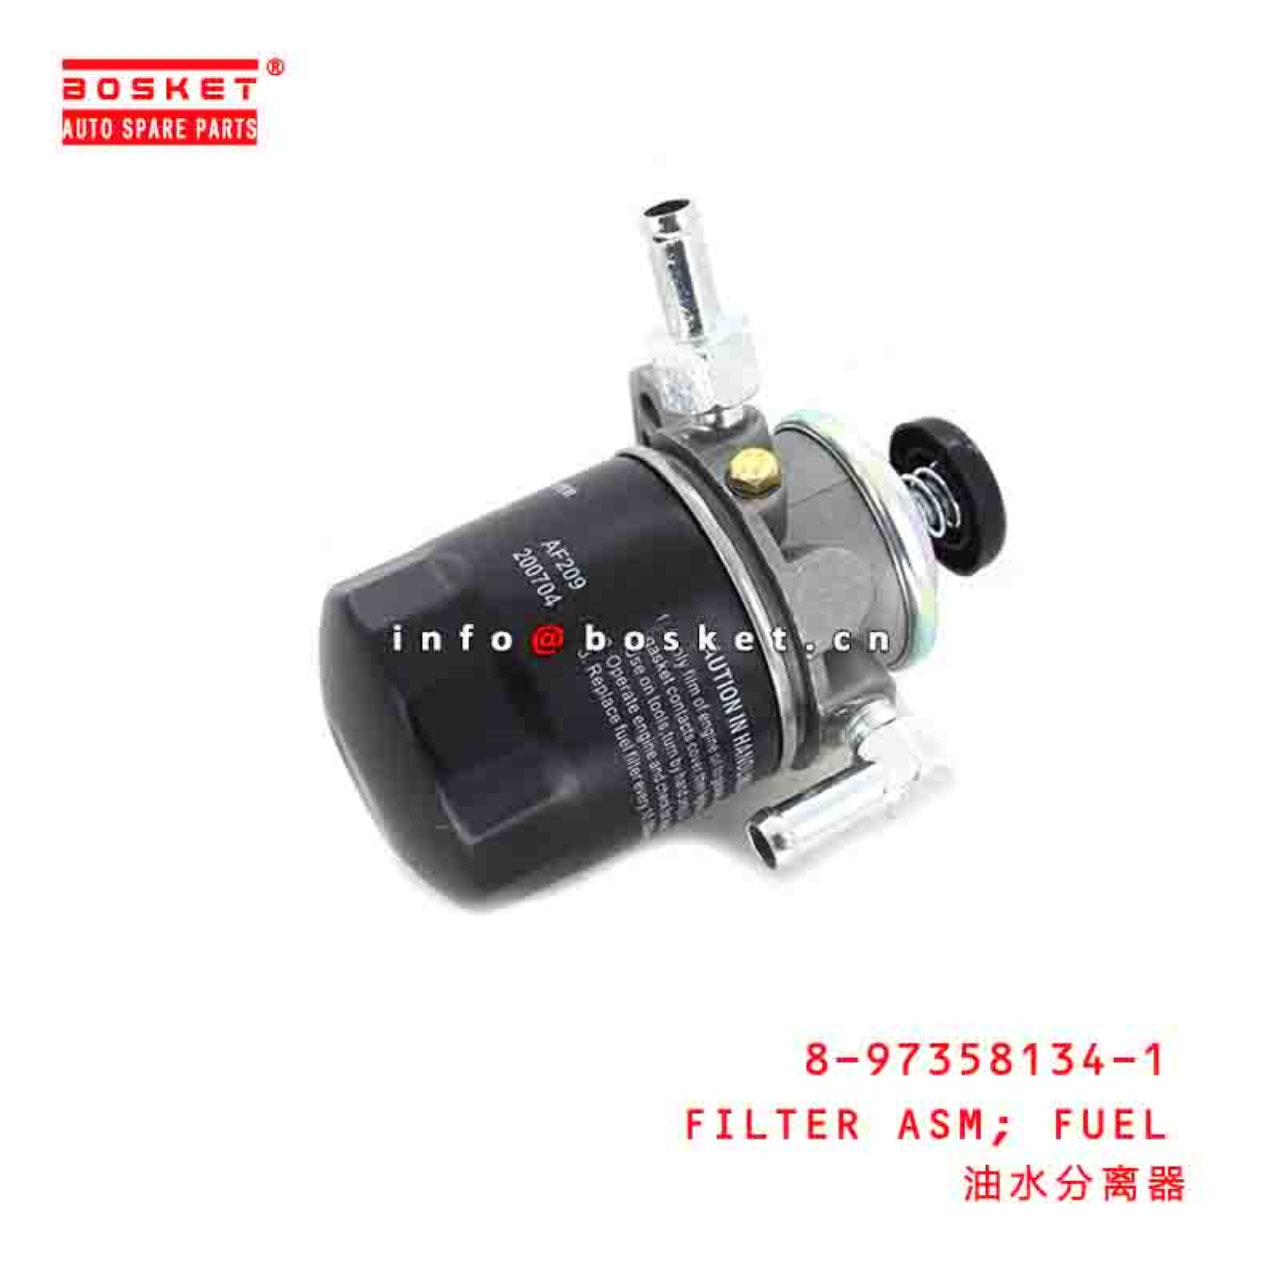 8-97358134-1 8973581341 FUEL FILTER ASSEMBLY Suitable FOR ISUZU TFR